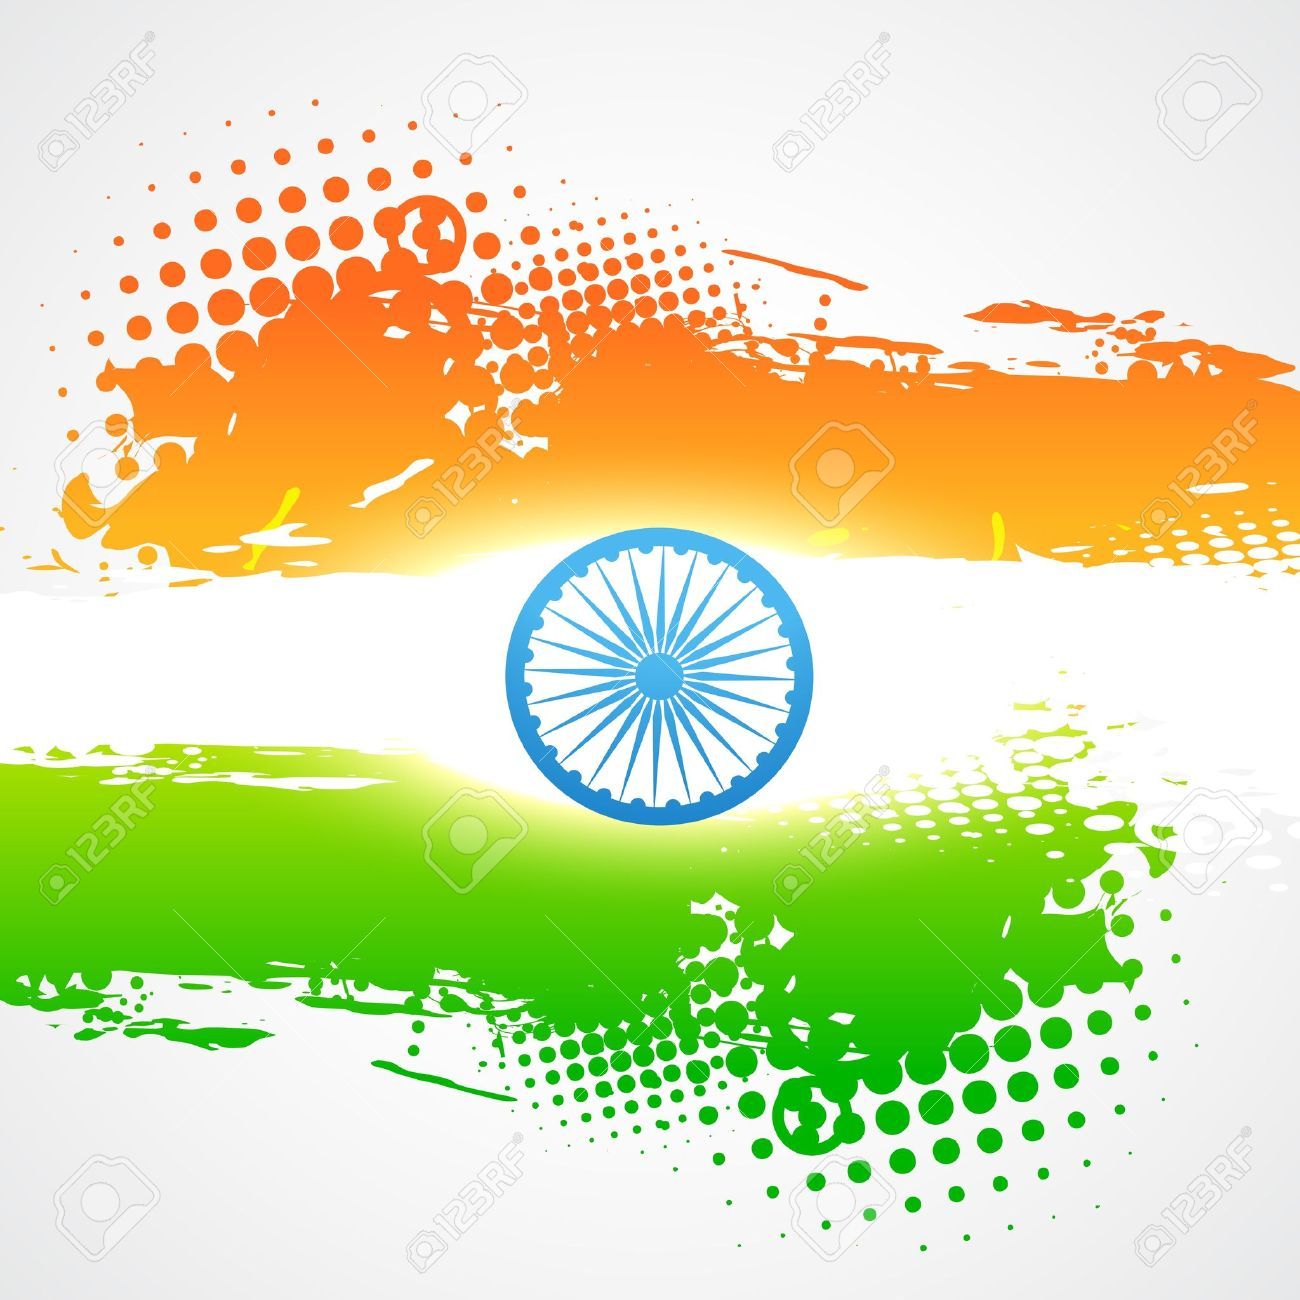 Stylish Indian Flags Png - 1300x1300 Wallpaper 